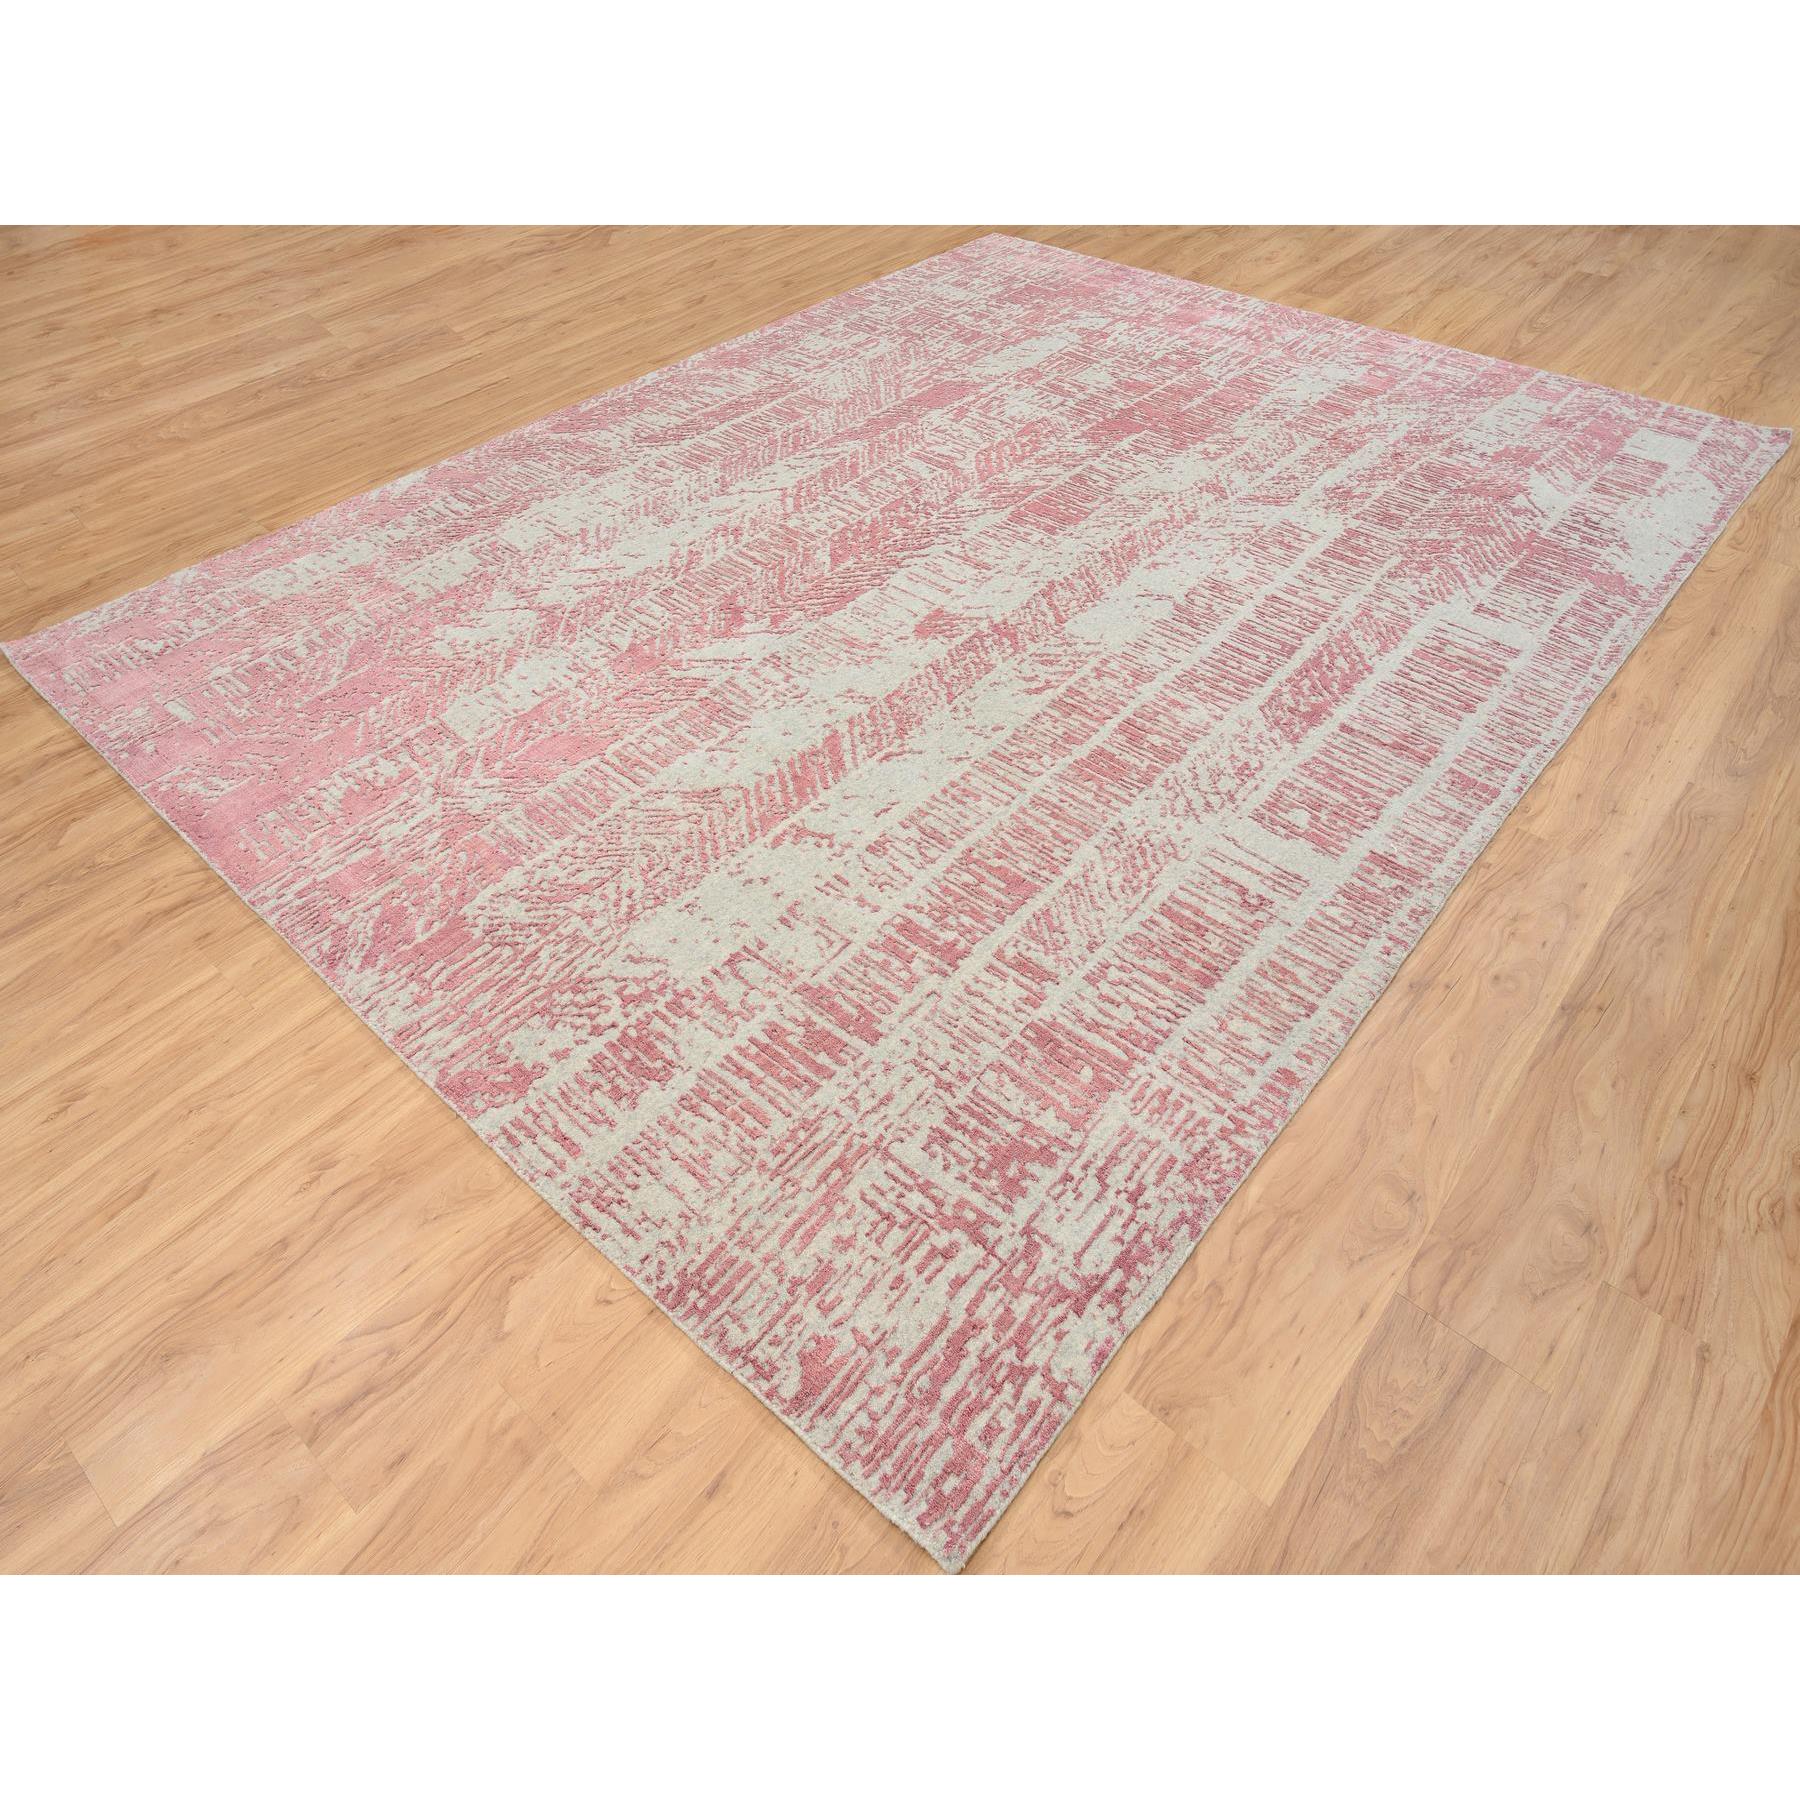 9'x11'10" Rose Pink, Jacquard Hand Loomed All Over Design, Wool and Art Silk, Oriental Rug 